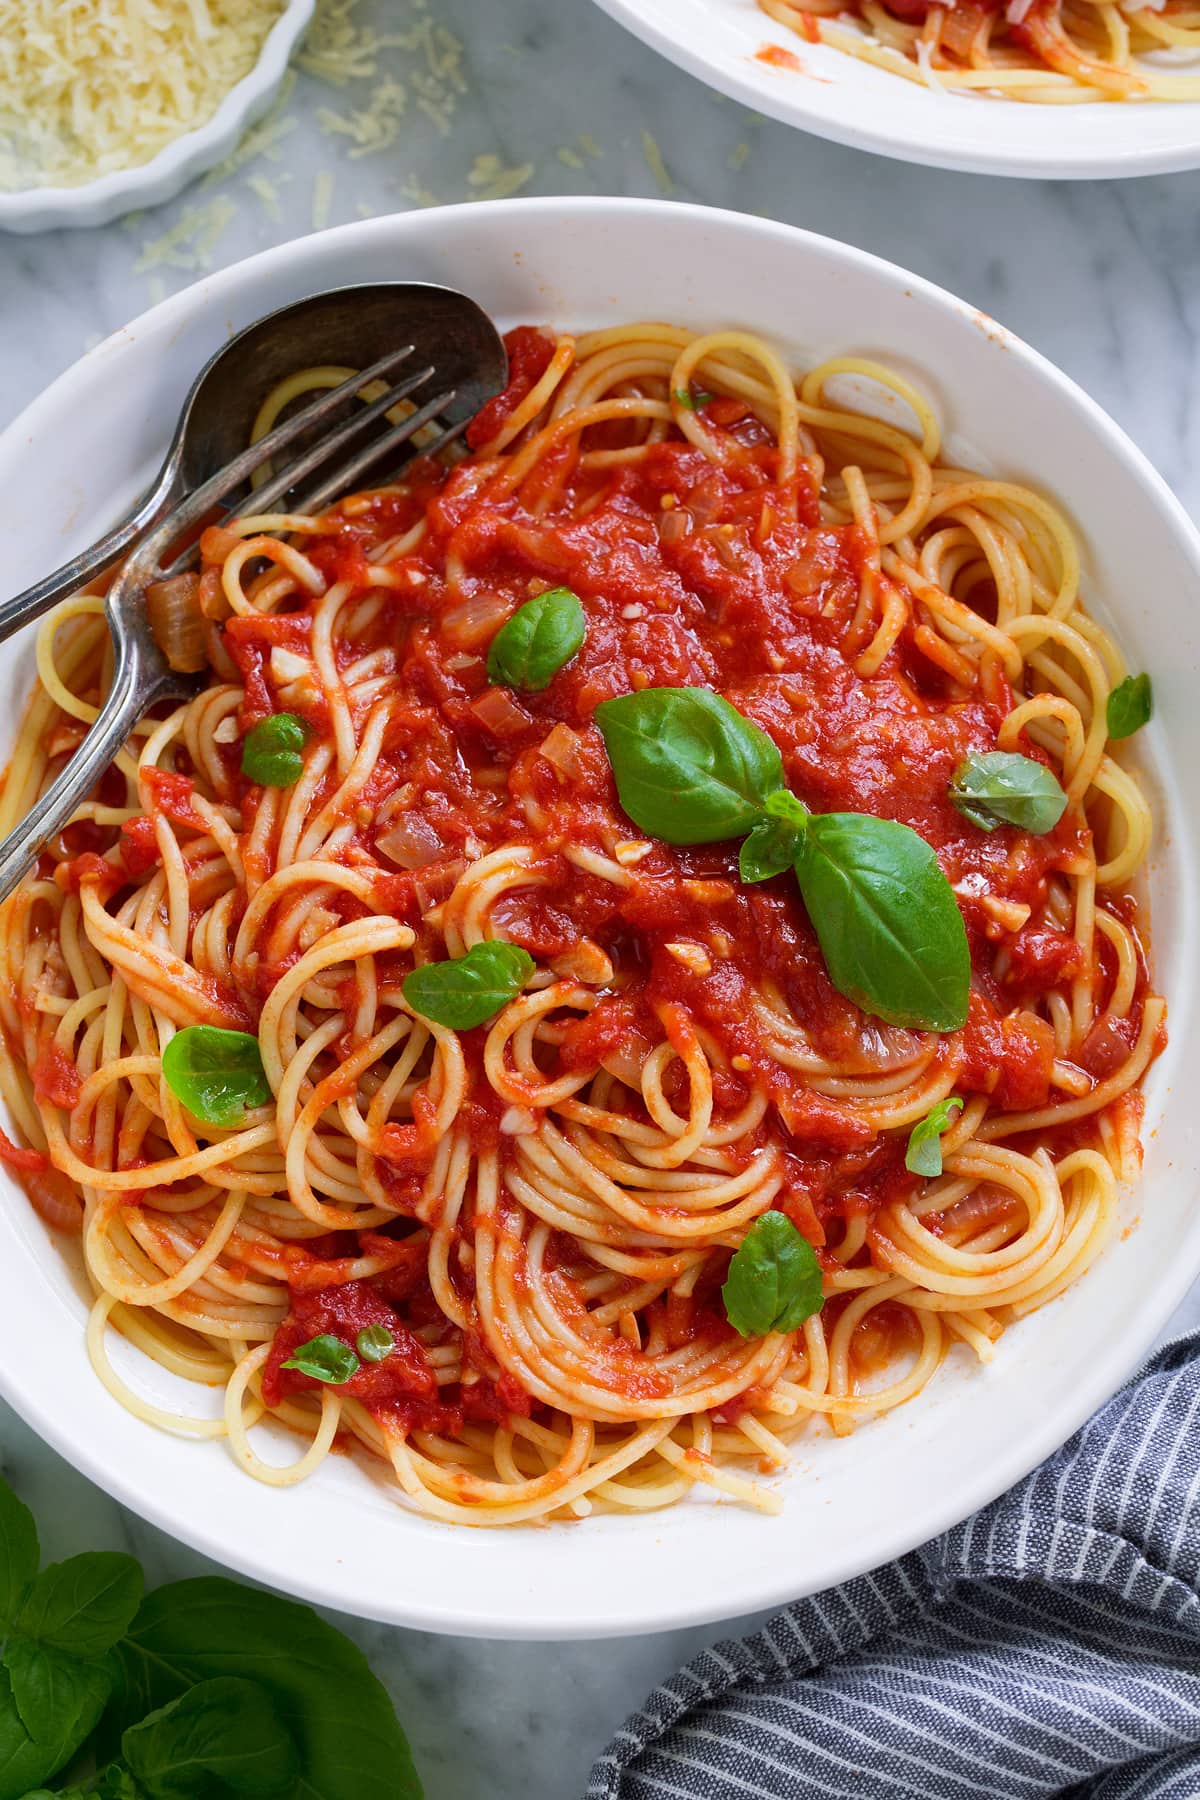 Marinara sauce tossed with spaghetti in a pasta bowl.